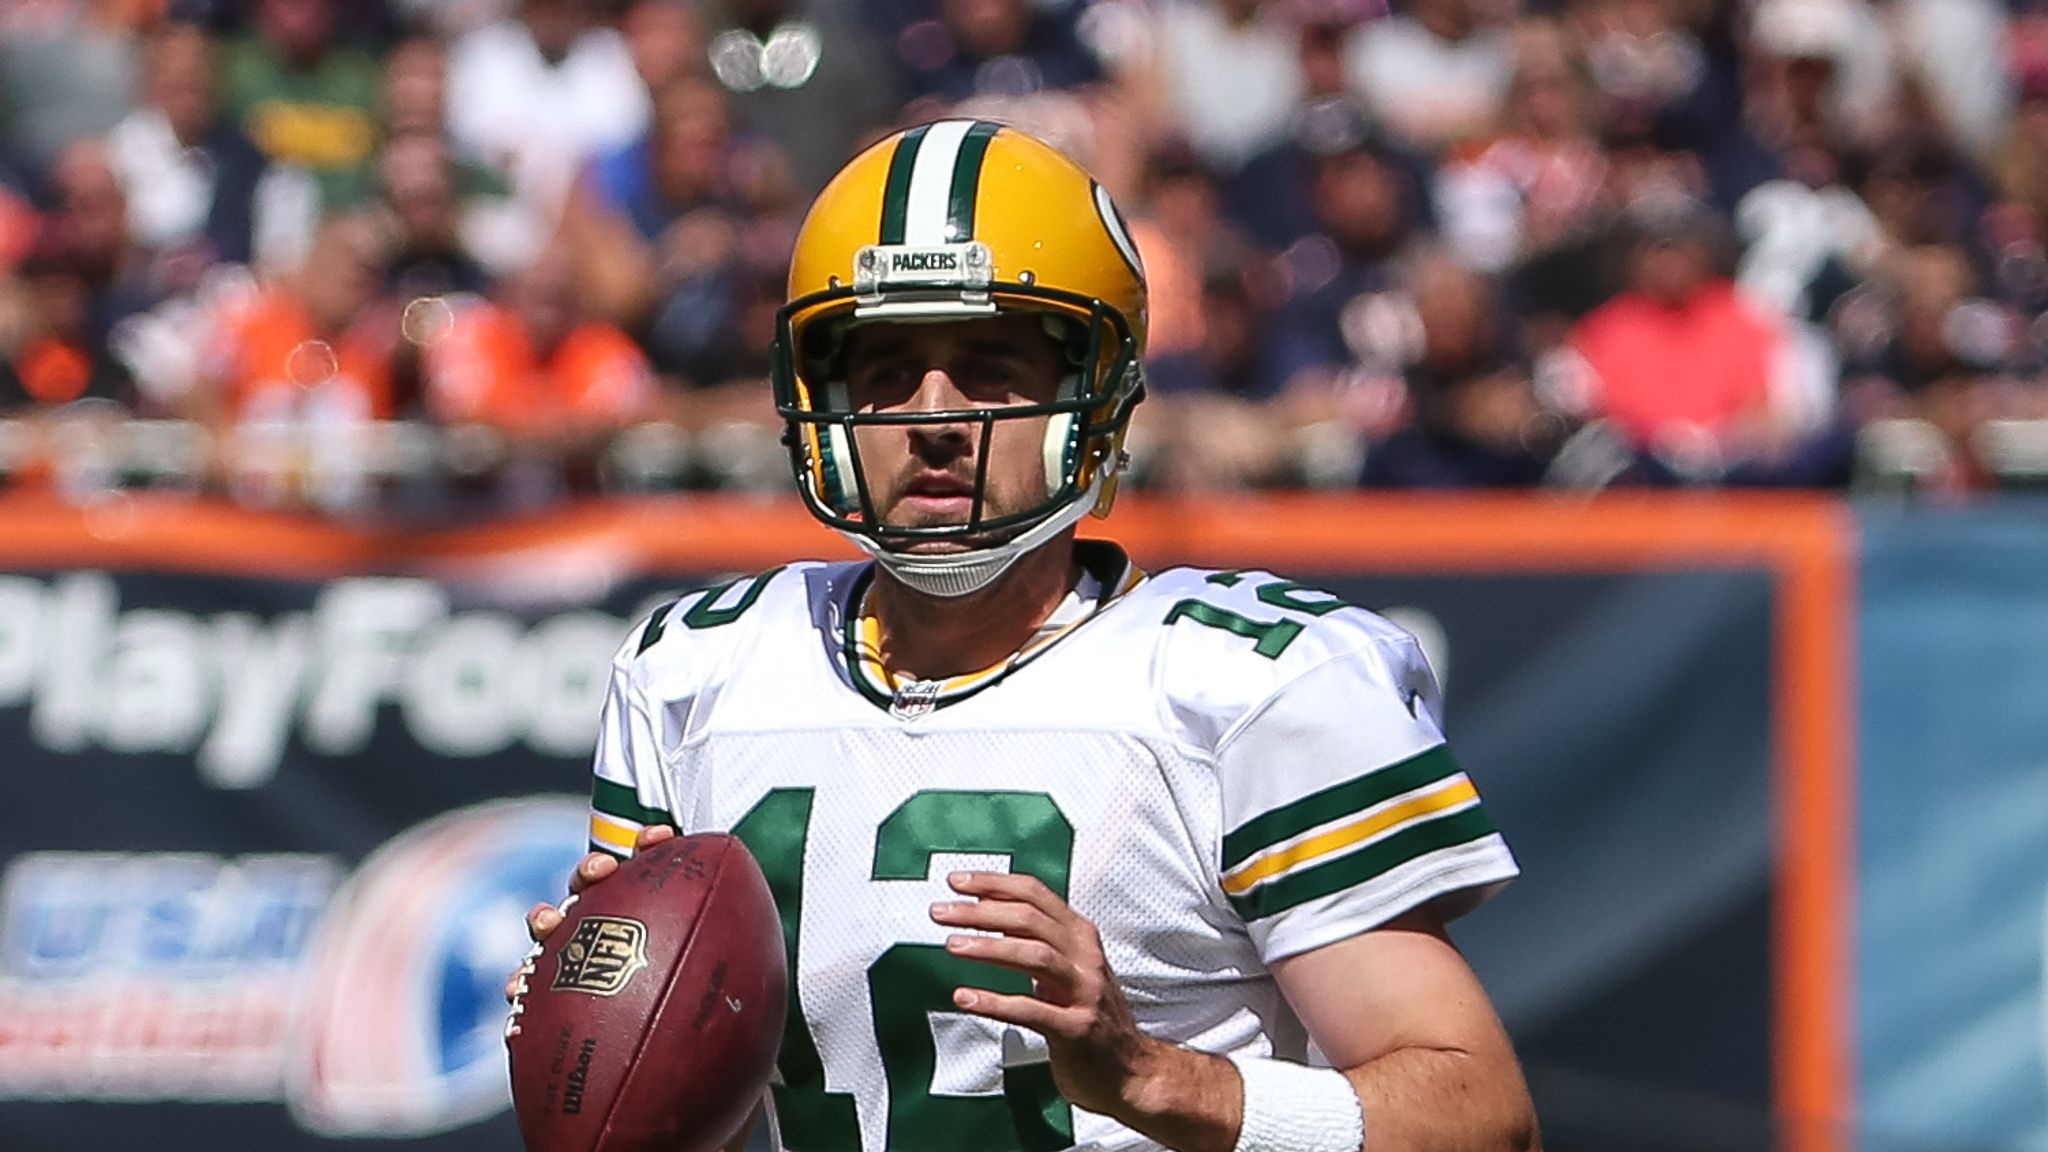 Packers avoid lapse that could have cost them in NFC playoff picture